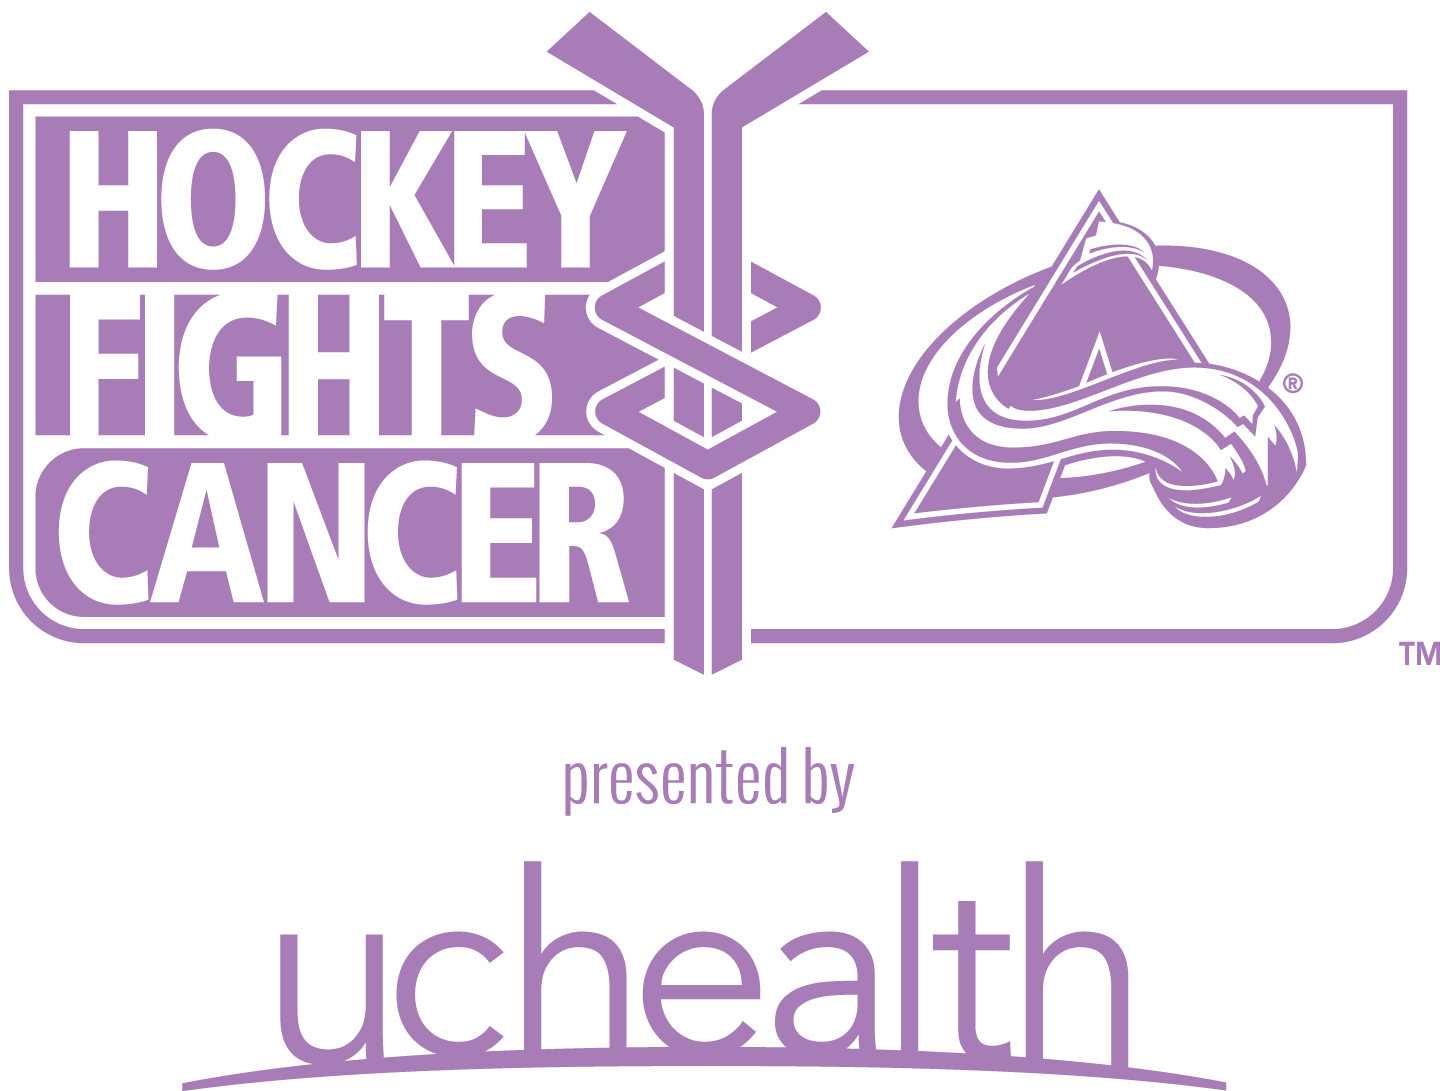 avalanche hockey fights cancer 2019